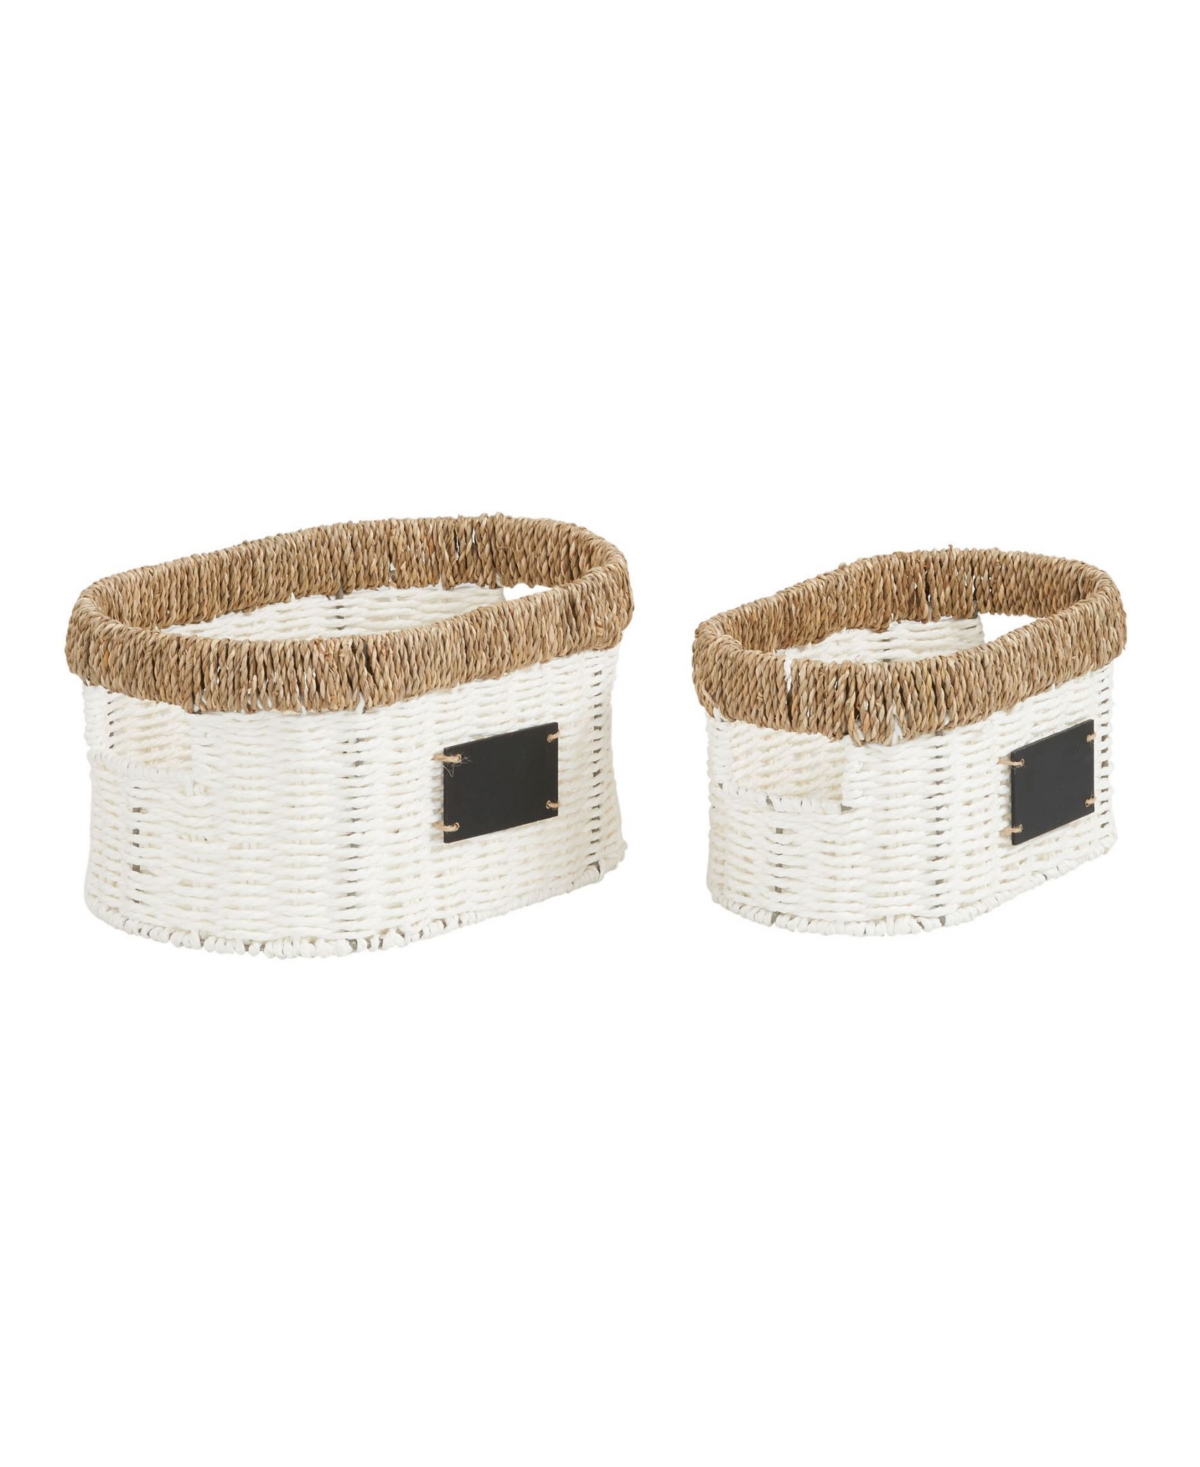 Household Essentials Paper Rope And Sea Grass Oval Basket, Set Of 2 In White Paper Rope,natural Seagrass Trim